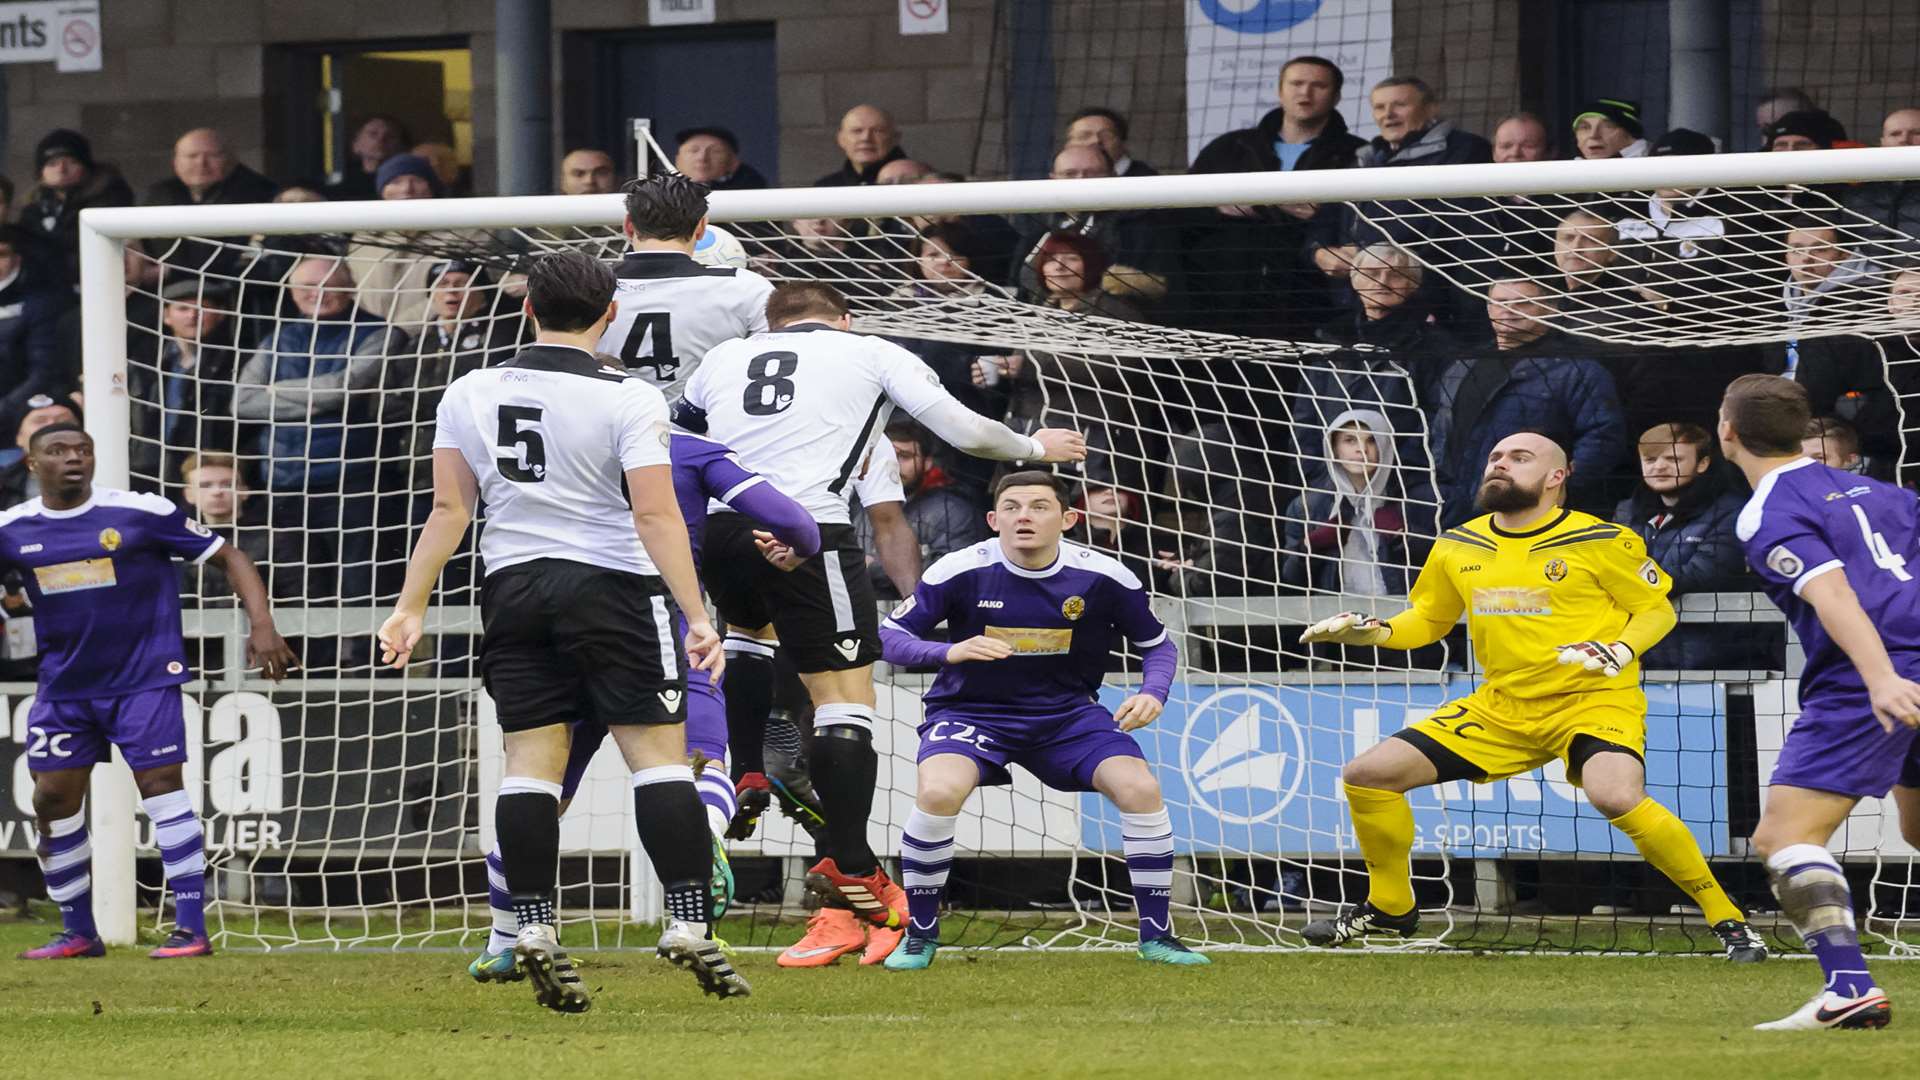 Tom Bonner (4) heads in Dartford's opening goal. Picture: Andy Payton